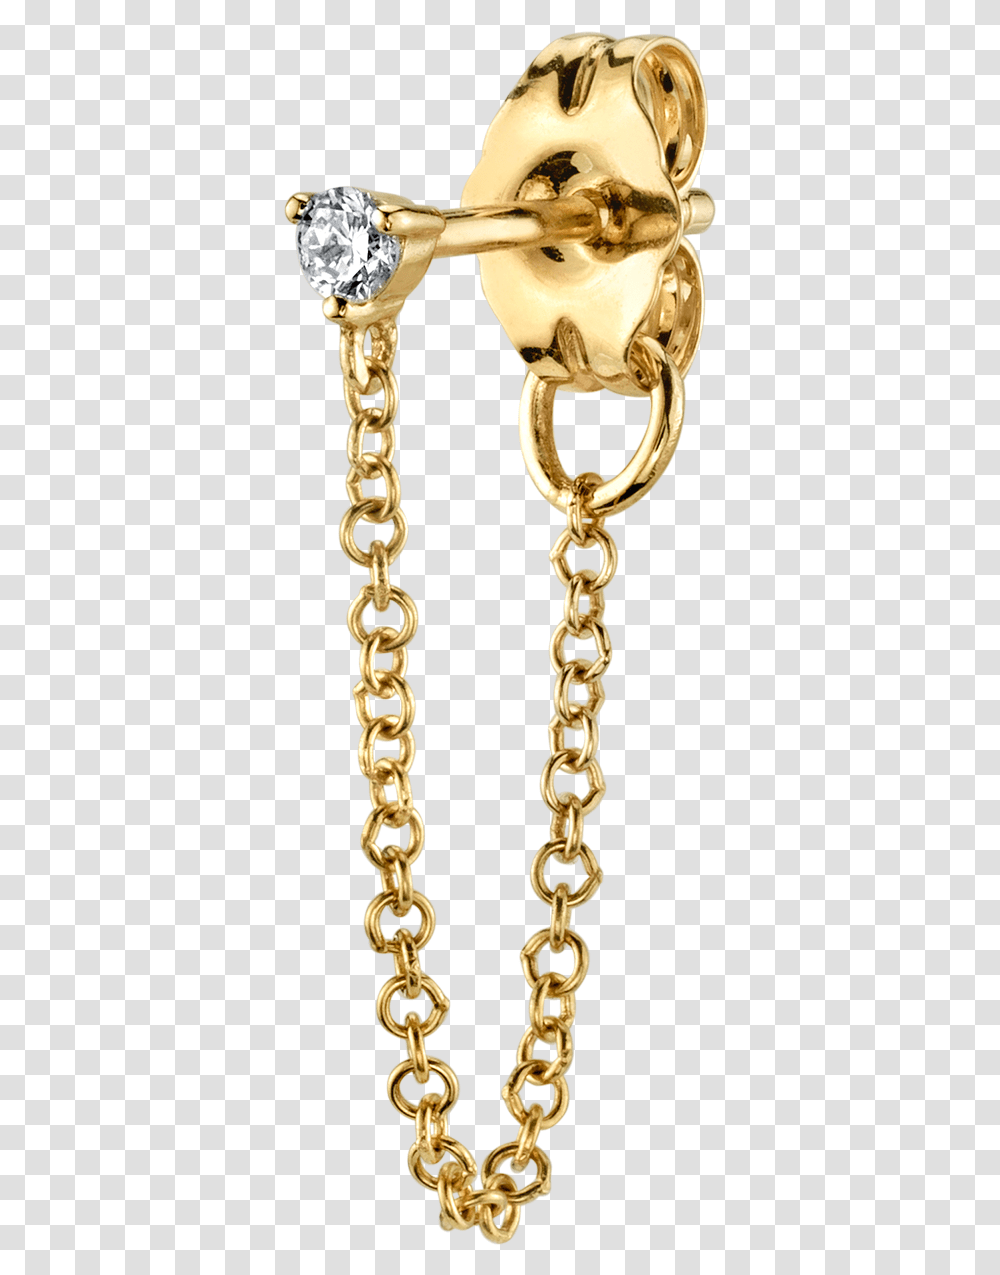 Diamond Chain Earring Chain Transparent Png